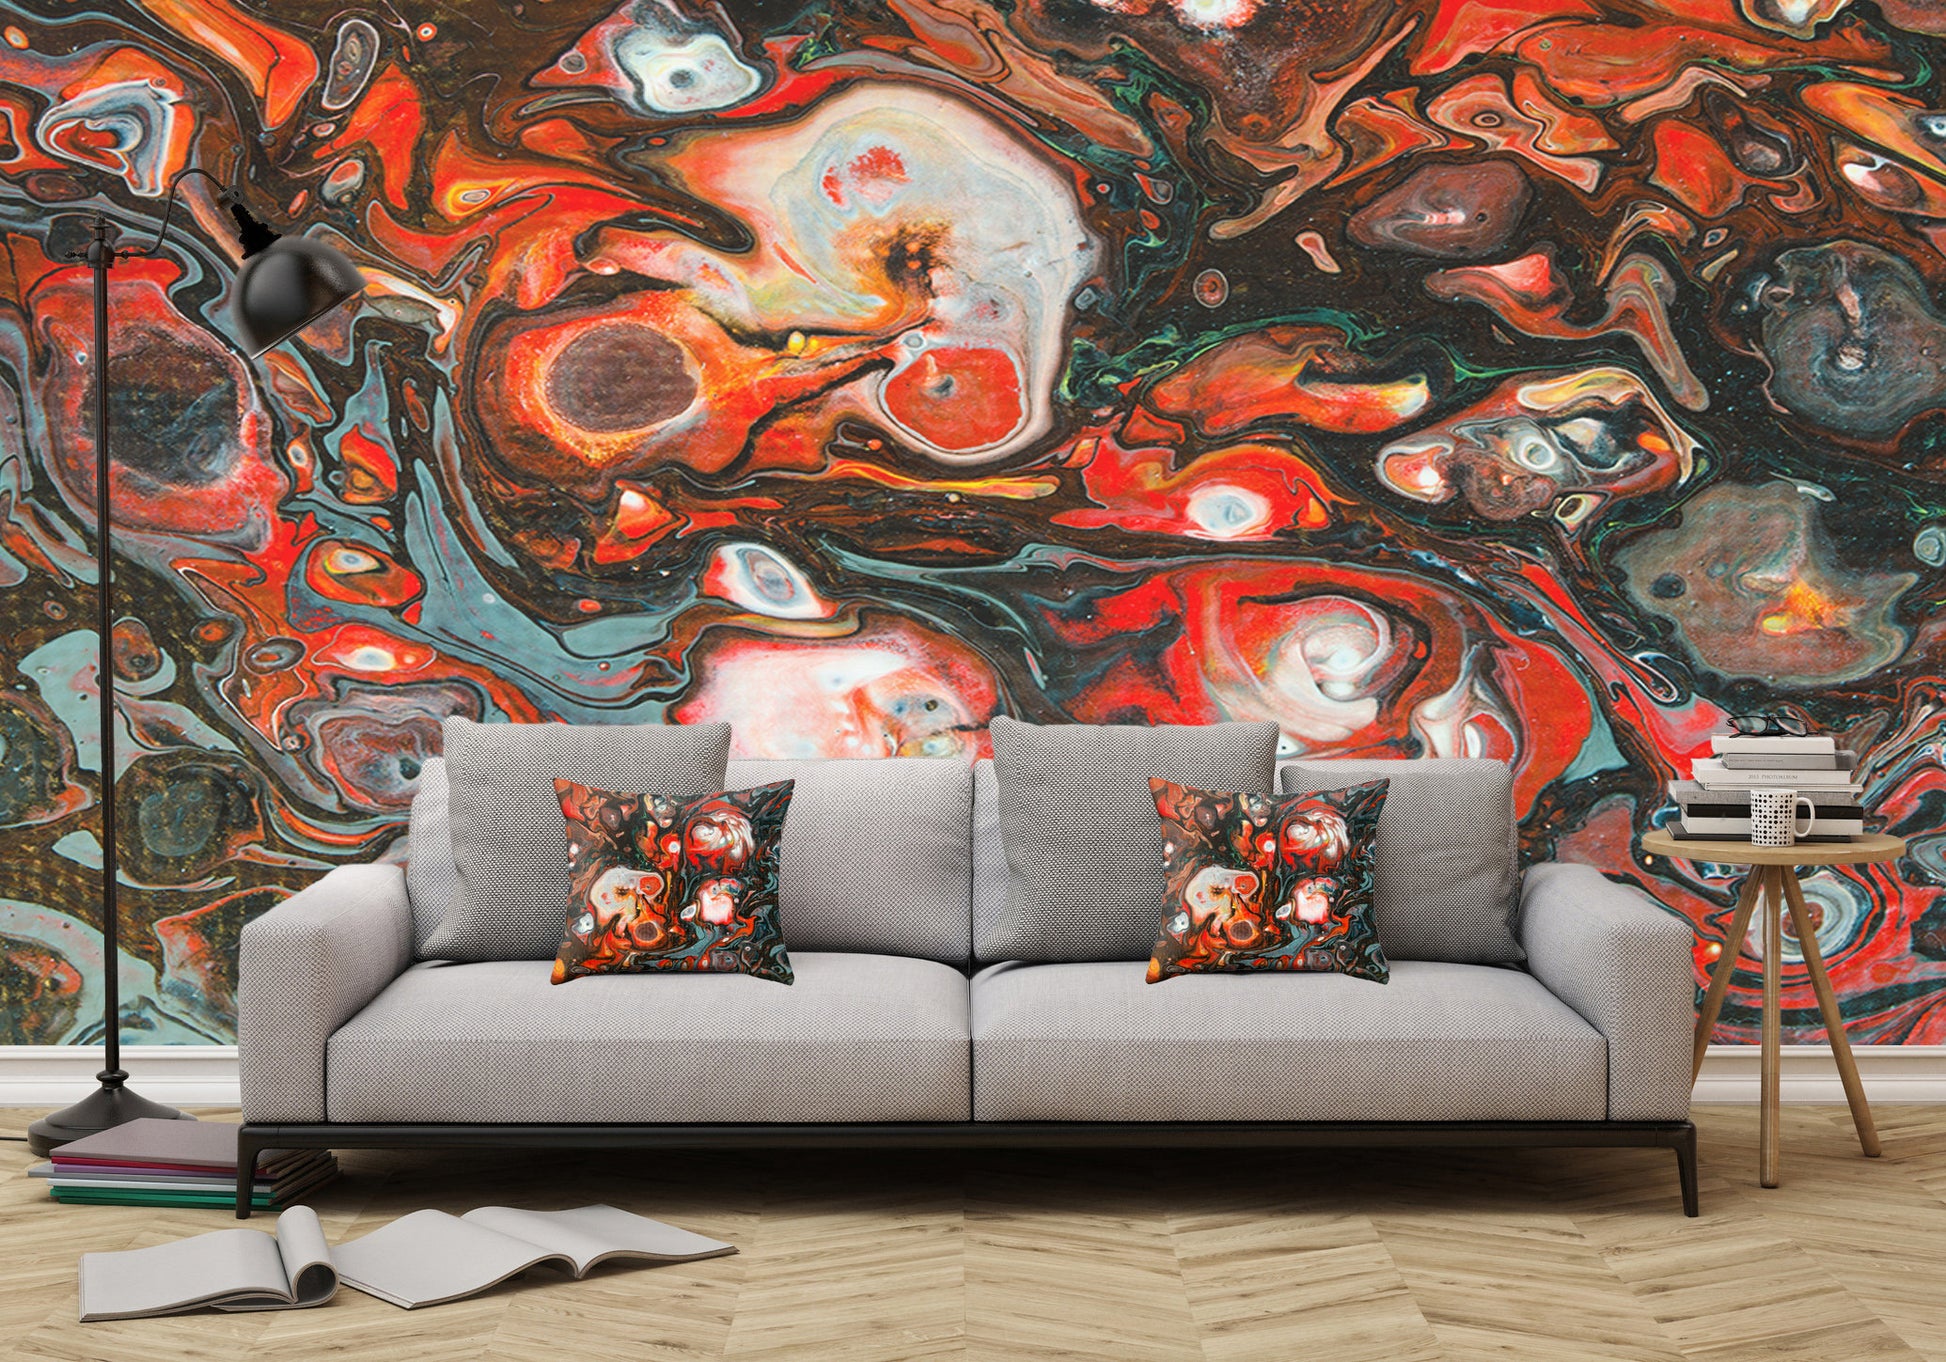 Removable Wall Mural - Wallpaper  Abstract Artwork - Fluid Art Pour 22  - PIPAFINEART